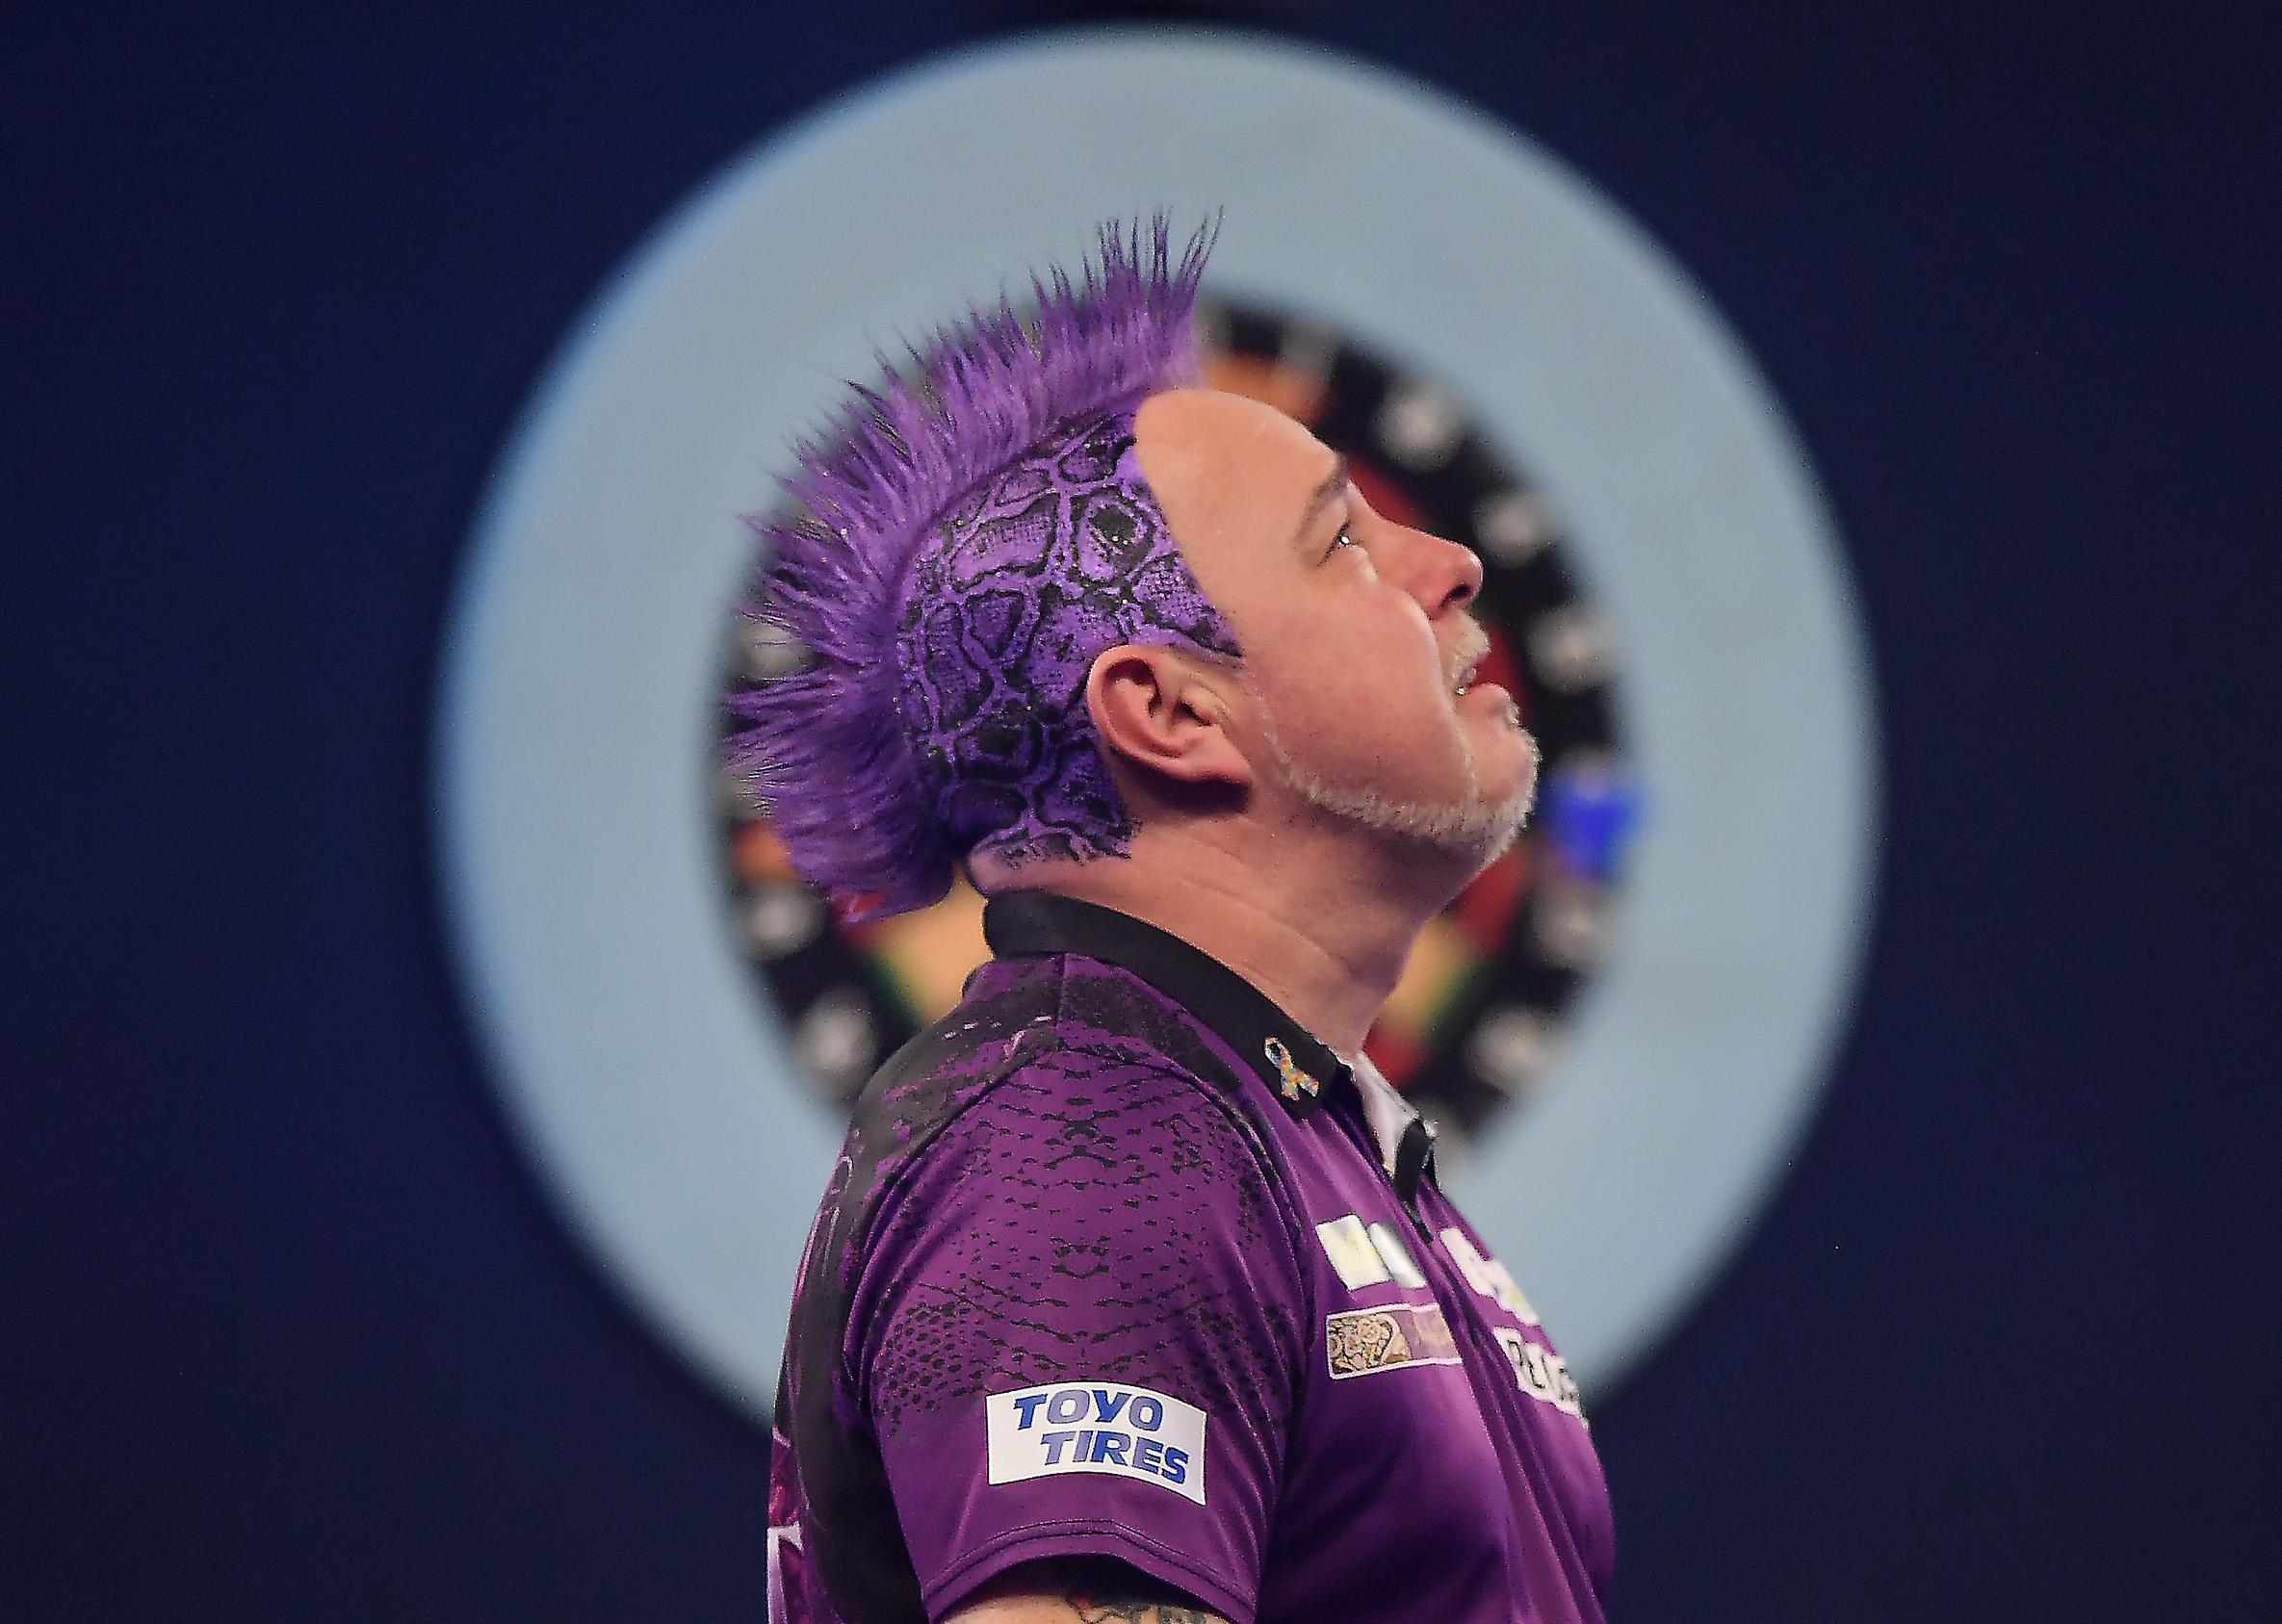 LONDON, ENGLAND - DECEMBER 31:  Peter Wright reacts after victory in the Final of the 2020 William Hill World Darts Championship between Peter Wright and Michael van Gerwen at Alexandra Palace on December 31, 2019 in London, England. (Photo by Alex Davidson/Getty Images)